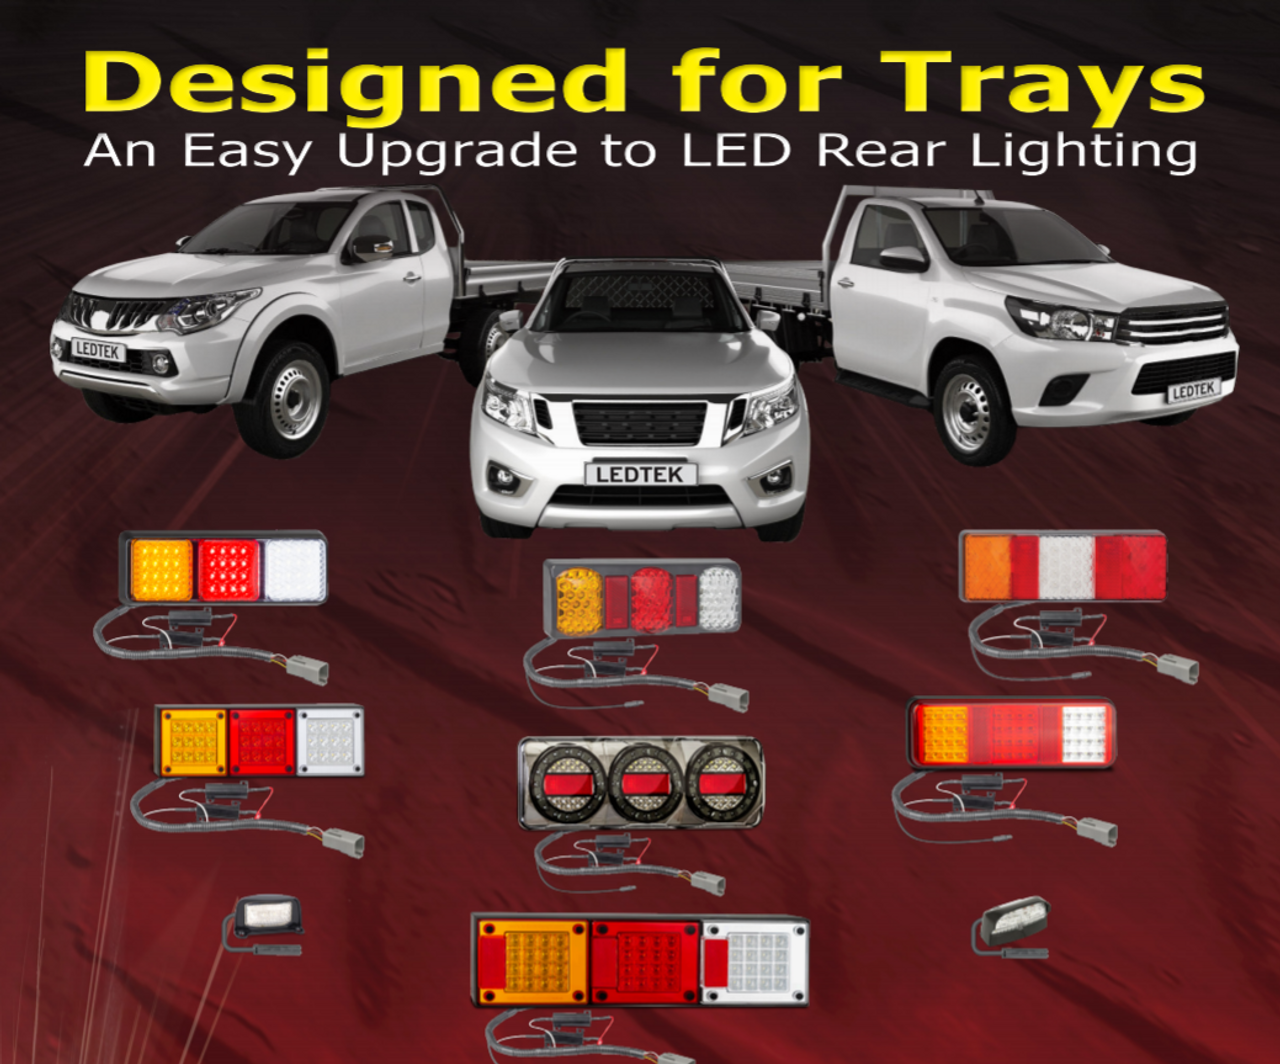 SO275GARWM2LR450+PATCHL-CRUISER - Land Cruiser LED Patch Cable System. Plug and Play. Easy LED Upgrade. Designed for Trays. 275G Series Light. Stop, Tail, Indicator and Reverse. 12v Only. Lamp with Conversion Cable. Application to Suit Toyota Land Cruiser. Autolamp. Ultimate LED. 